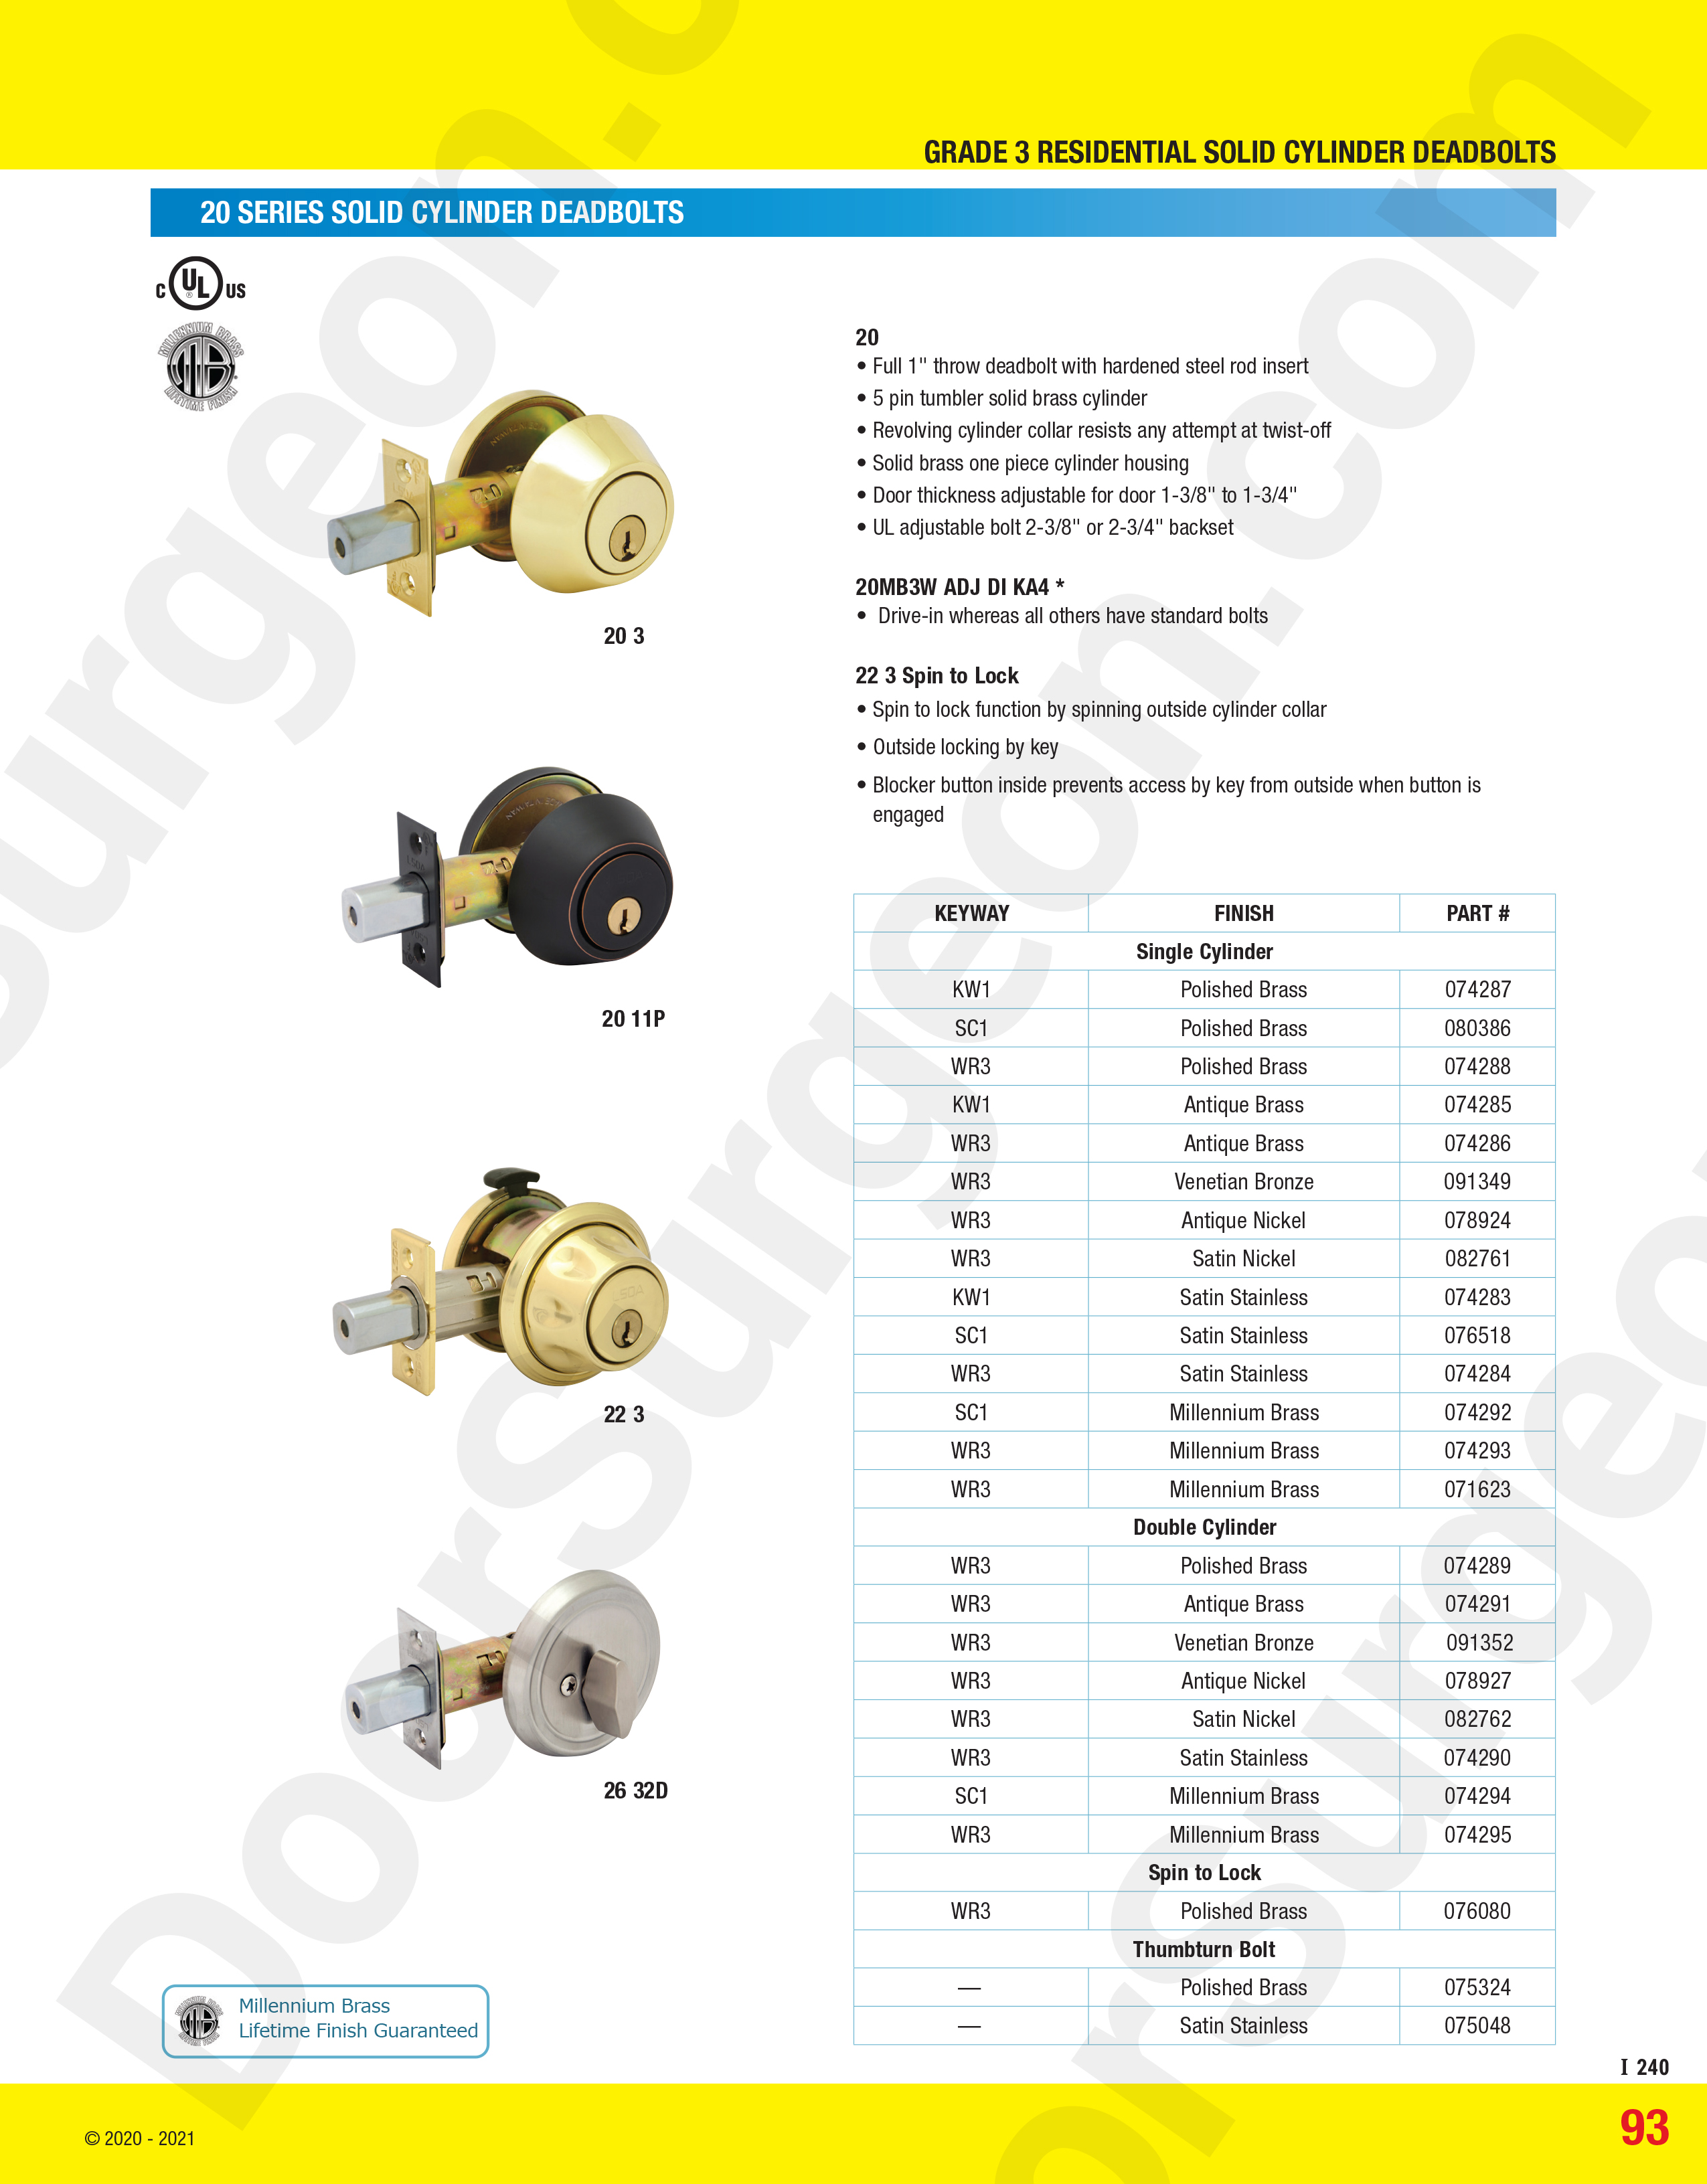 Top of grade deadbolts come in multiple colours and single-sided cylindar or double-sided cylinders.